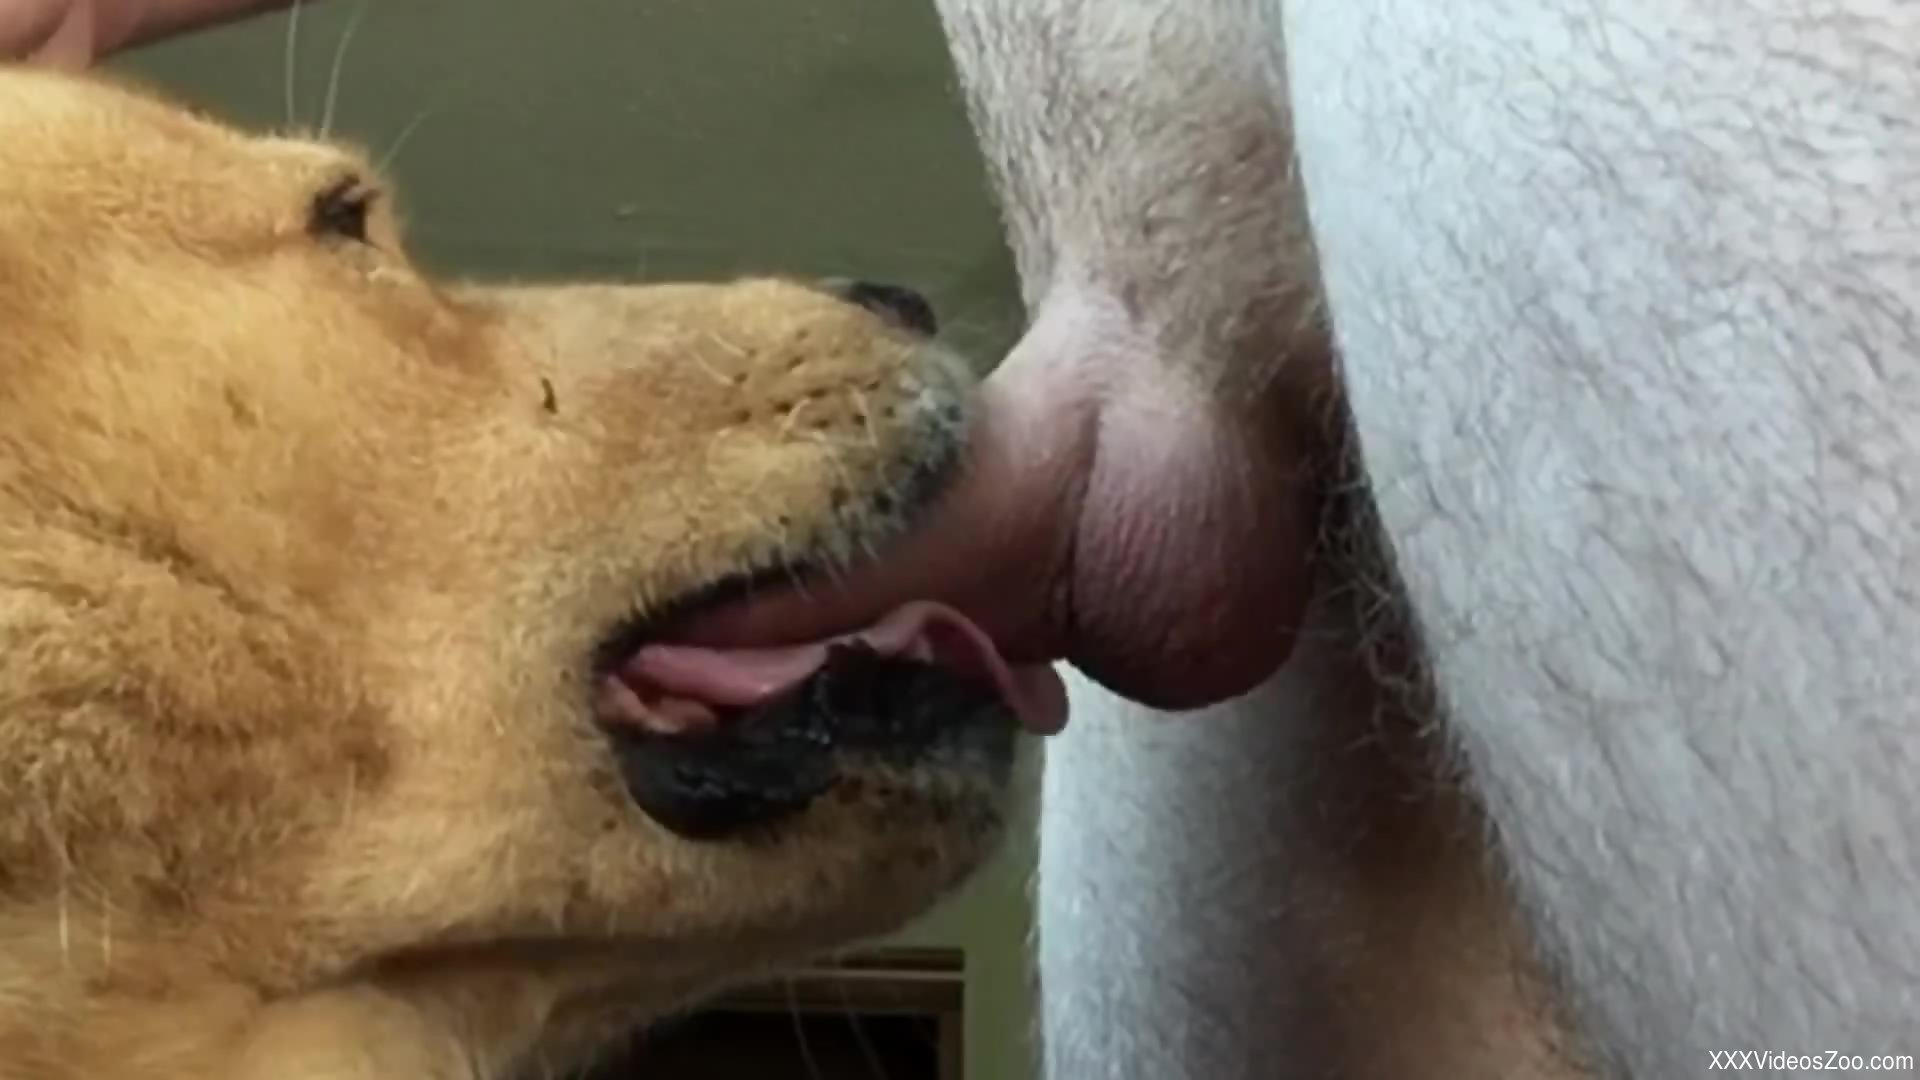 Dude Fingering A Dog's Hole In Preparation For Sex